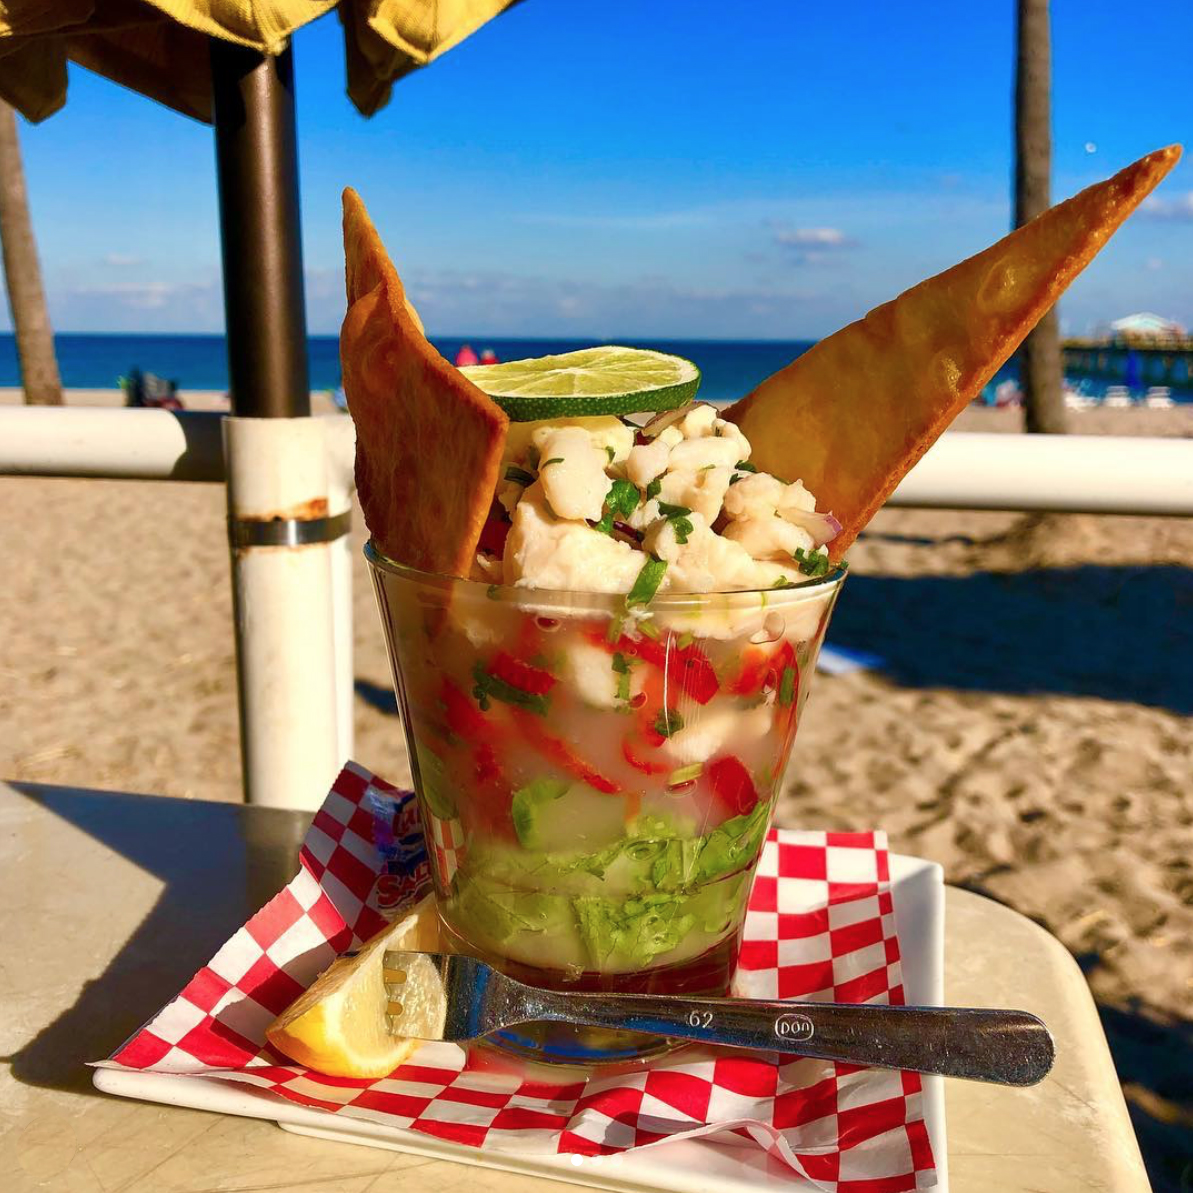 Seaside Saturday! 🌊☀️ We’ve got beautiful weather, good food and excellent live music going on all day today! 🌺🍹🌴 #freshceviche#dailyspecials #livemusic #islandvibes#ftlauderdale #lbts #arubabeachcafe